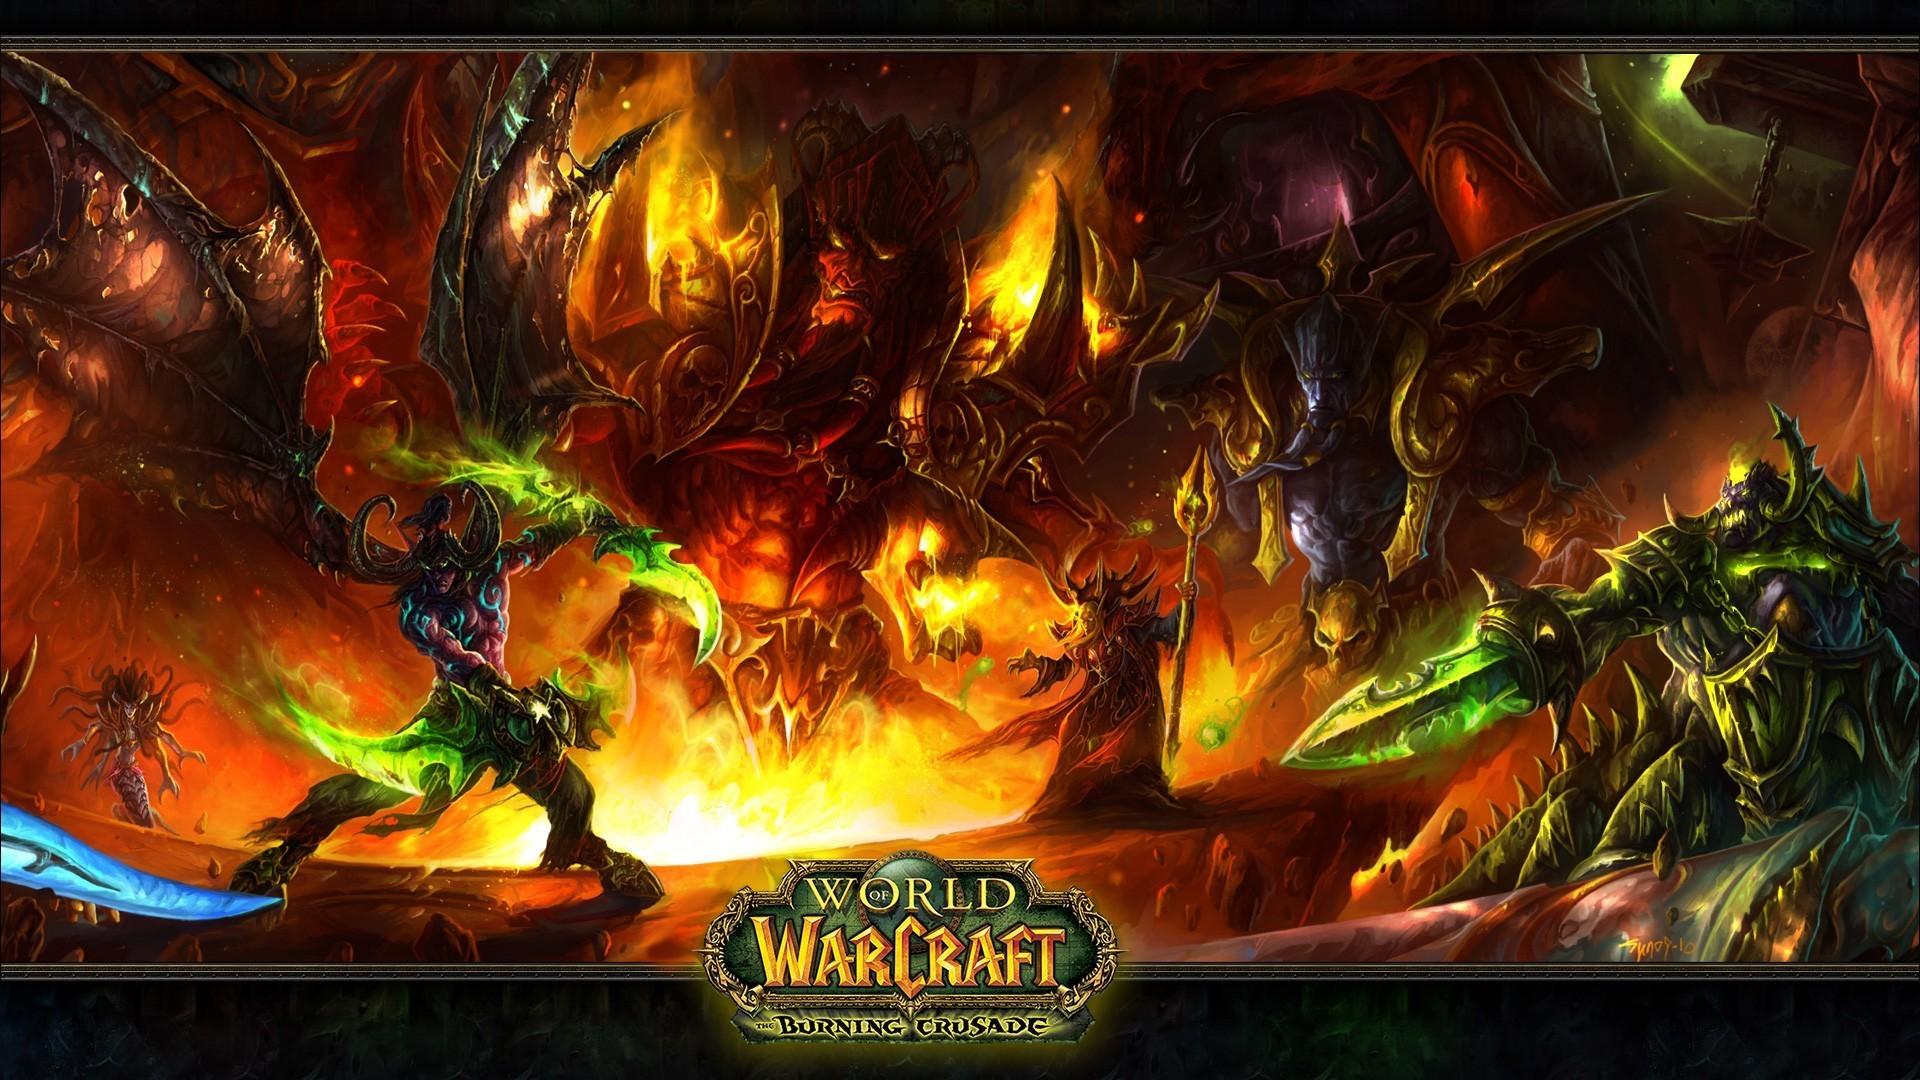 world of warcraft classic wallpapers wallpaper cave world of warcraft classic wallpapers